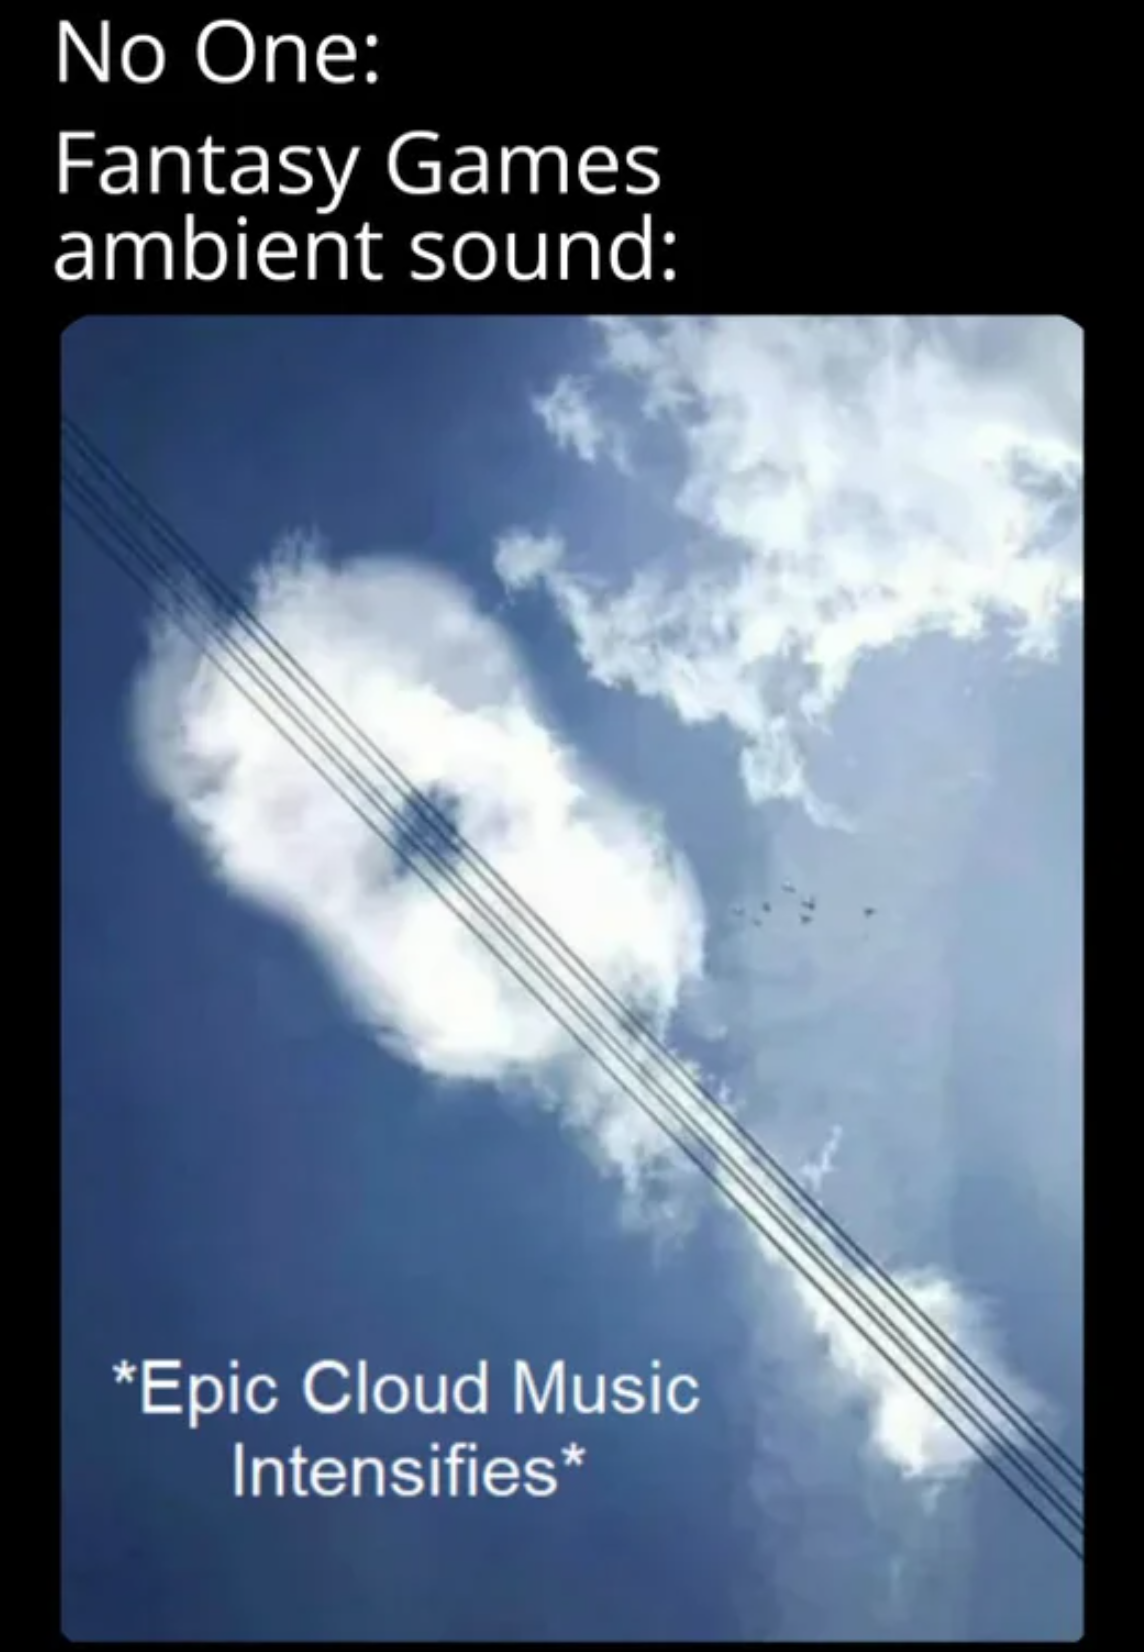 No One Fantasy Games ambient sound Epic Cloud Music Intensifies